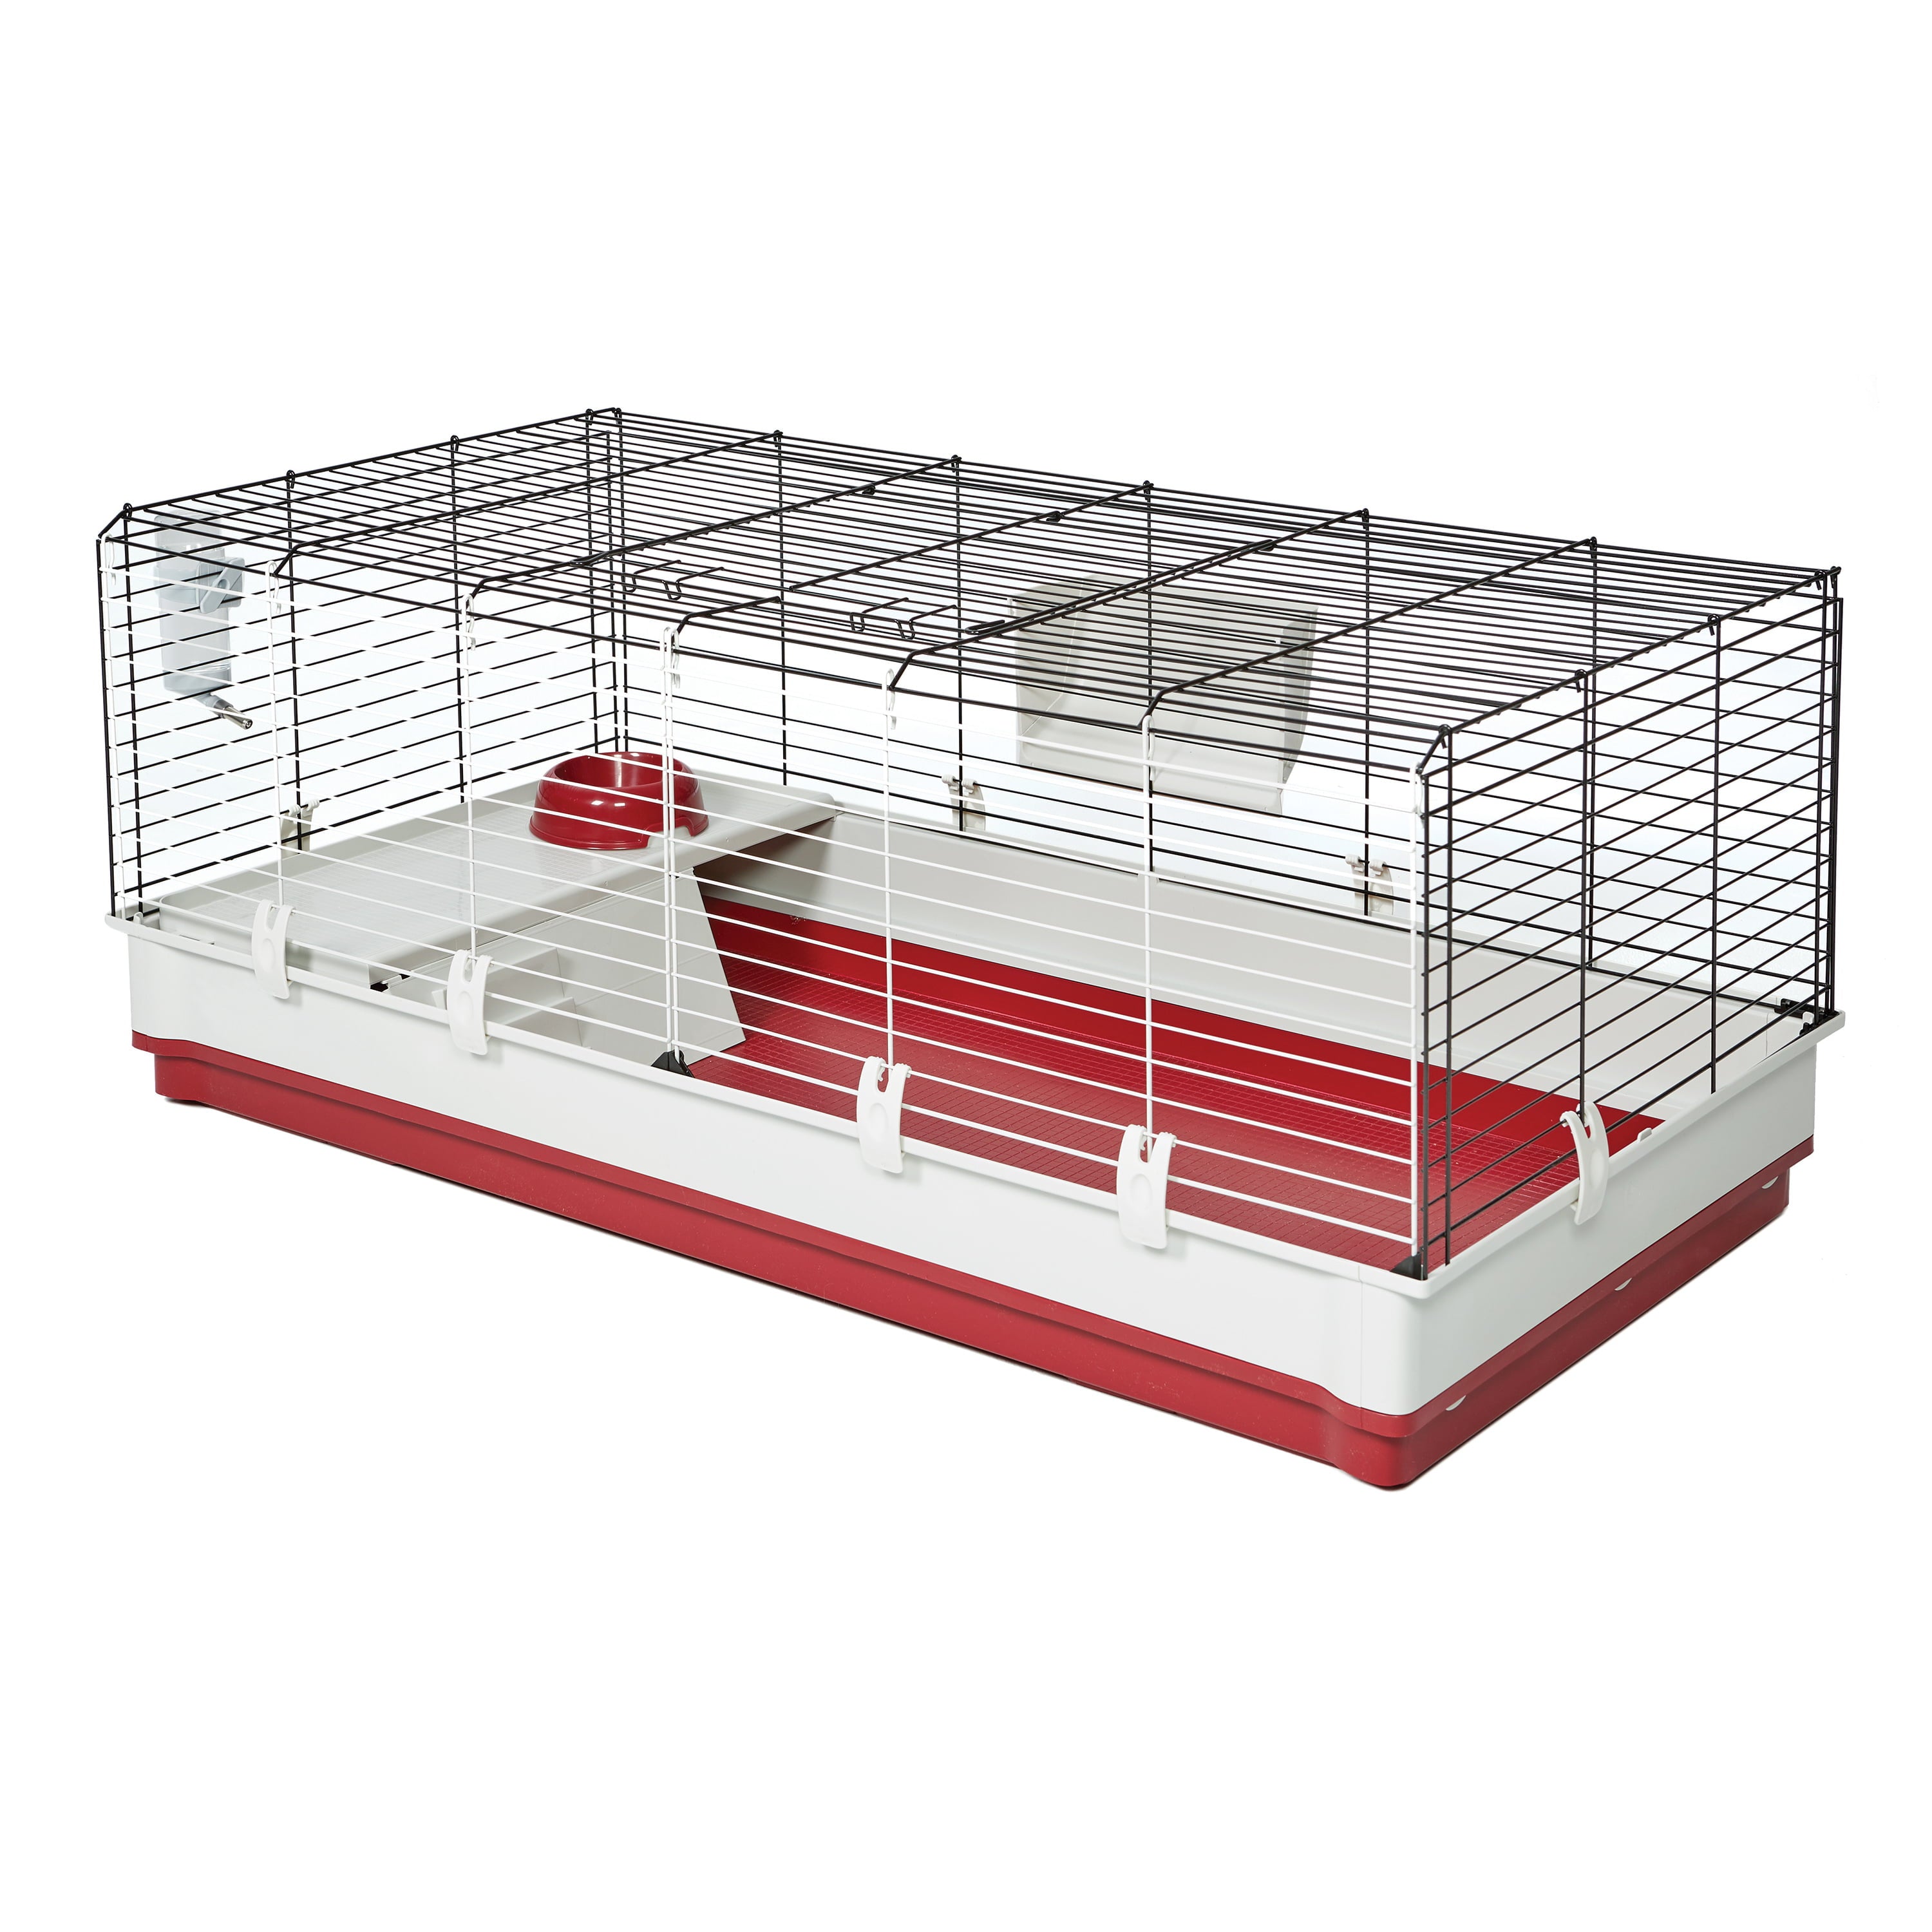 Midwest Homes for Pets Deluxe Rabbit and Guinea Pig Cage， X-Large， White and Red